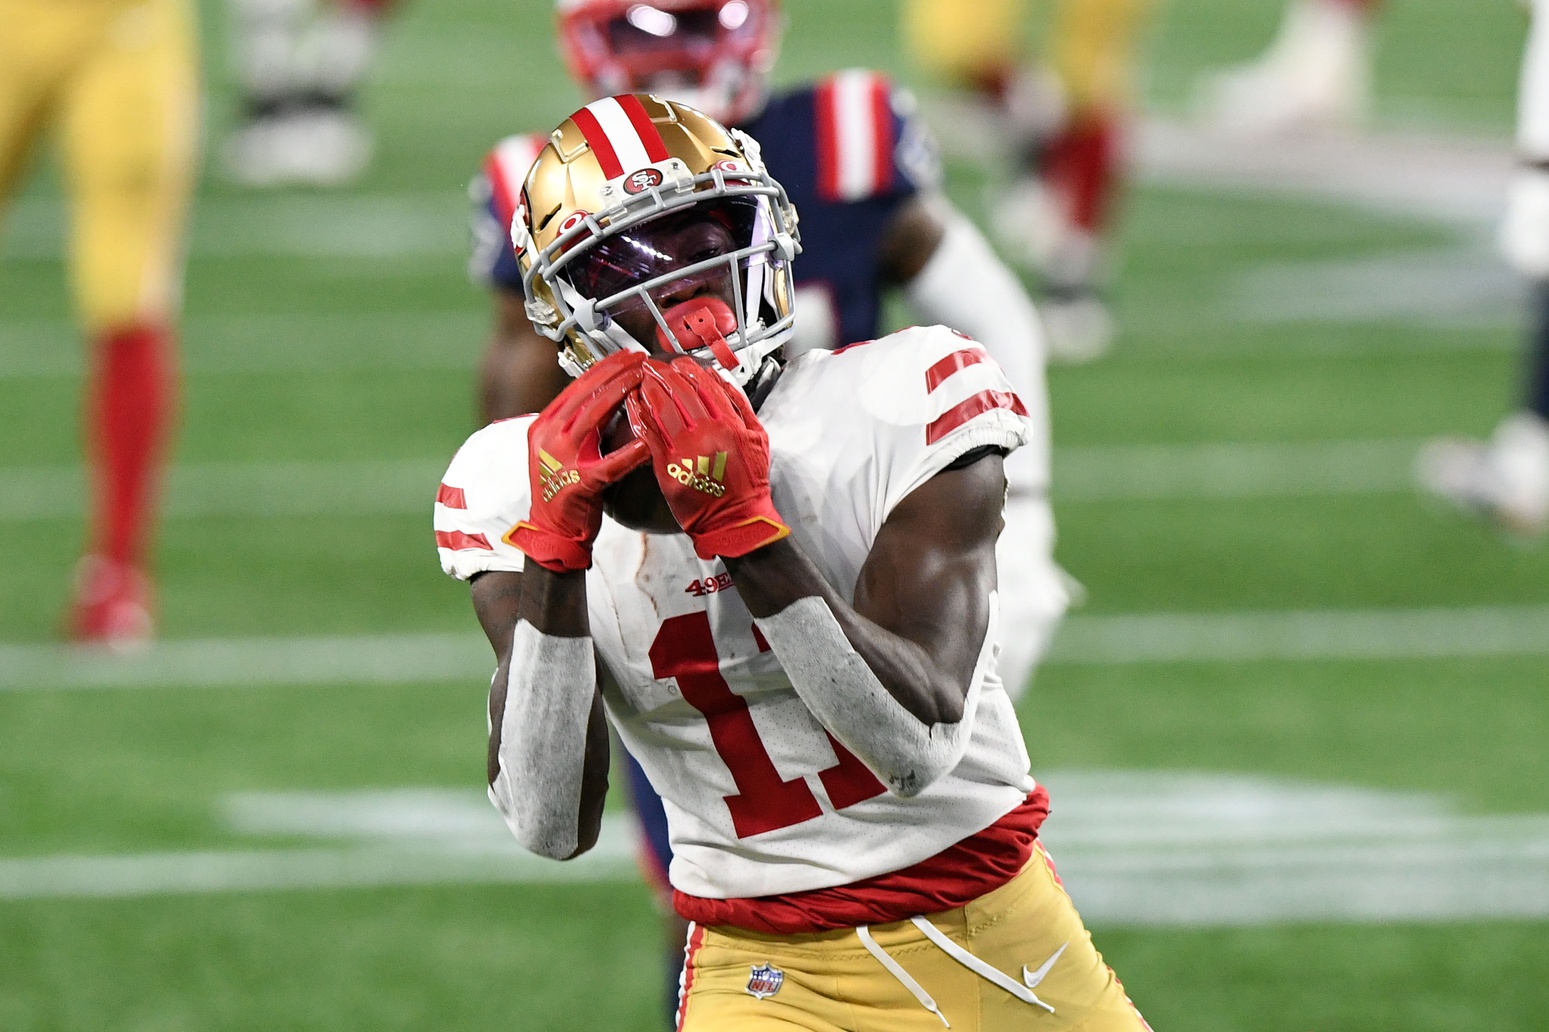 Oct 25, 2020; Foxborough, Massachusetts, USA; San Francisco 49ers wide receiver Brandon Aiyuk (11) makes a catch on a pass from quarterback Jimmy Garoppolo (not seen) during the second half against the New England Patriots at Gillette Stadium. Mandatory Credit: Brian Fluharty-USA TODAY Sports